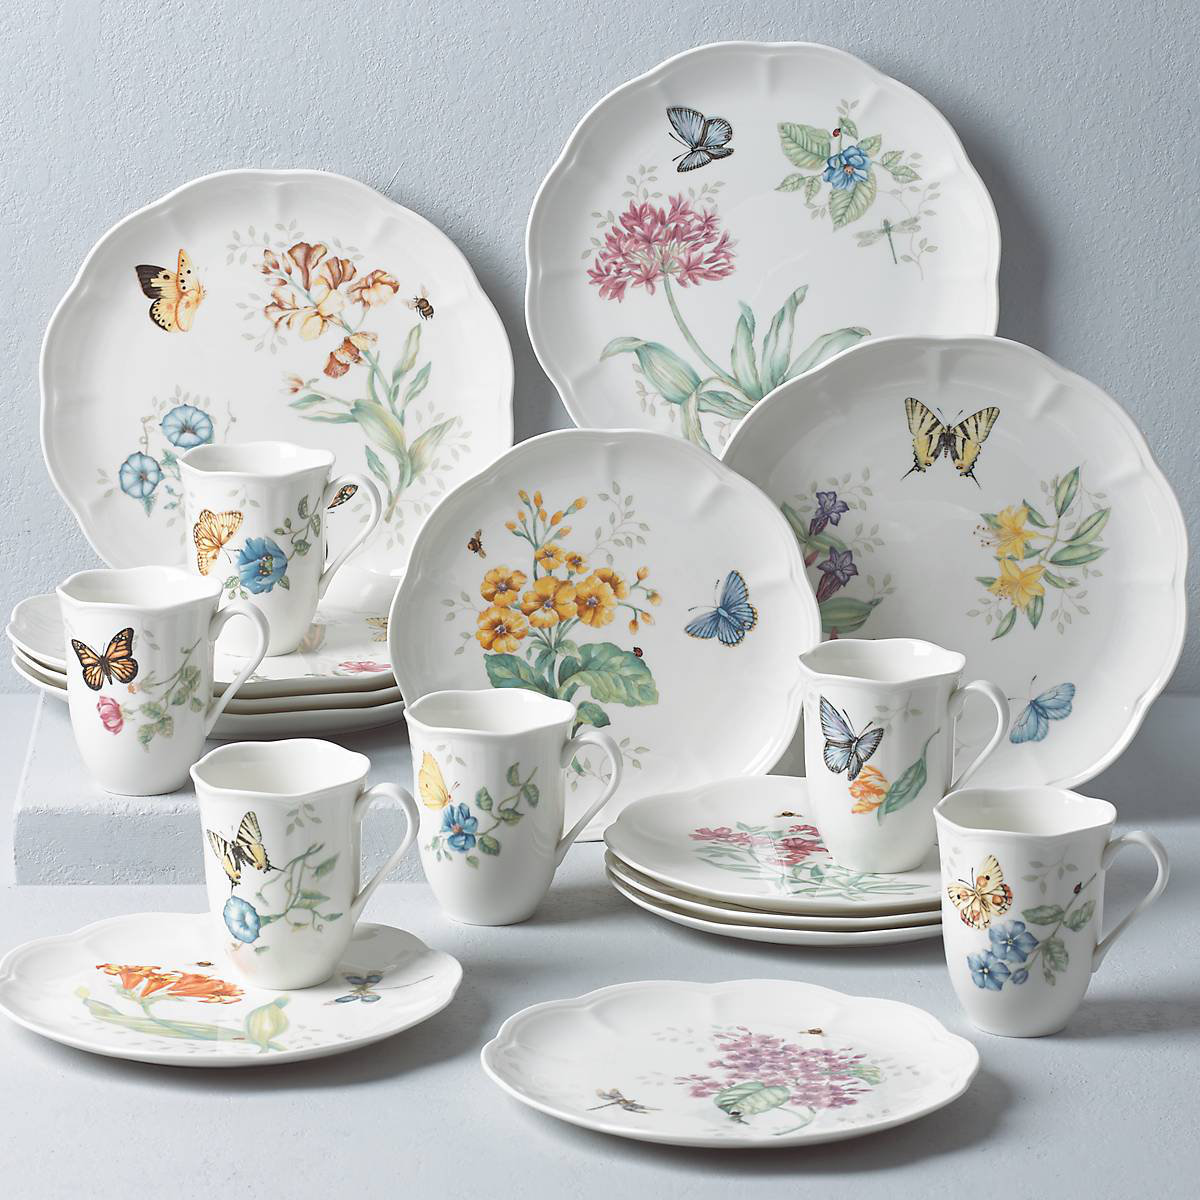 Stoneware vs. Bone China: What's the Difference? – Lenox Corporation